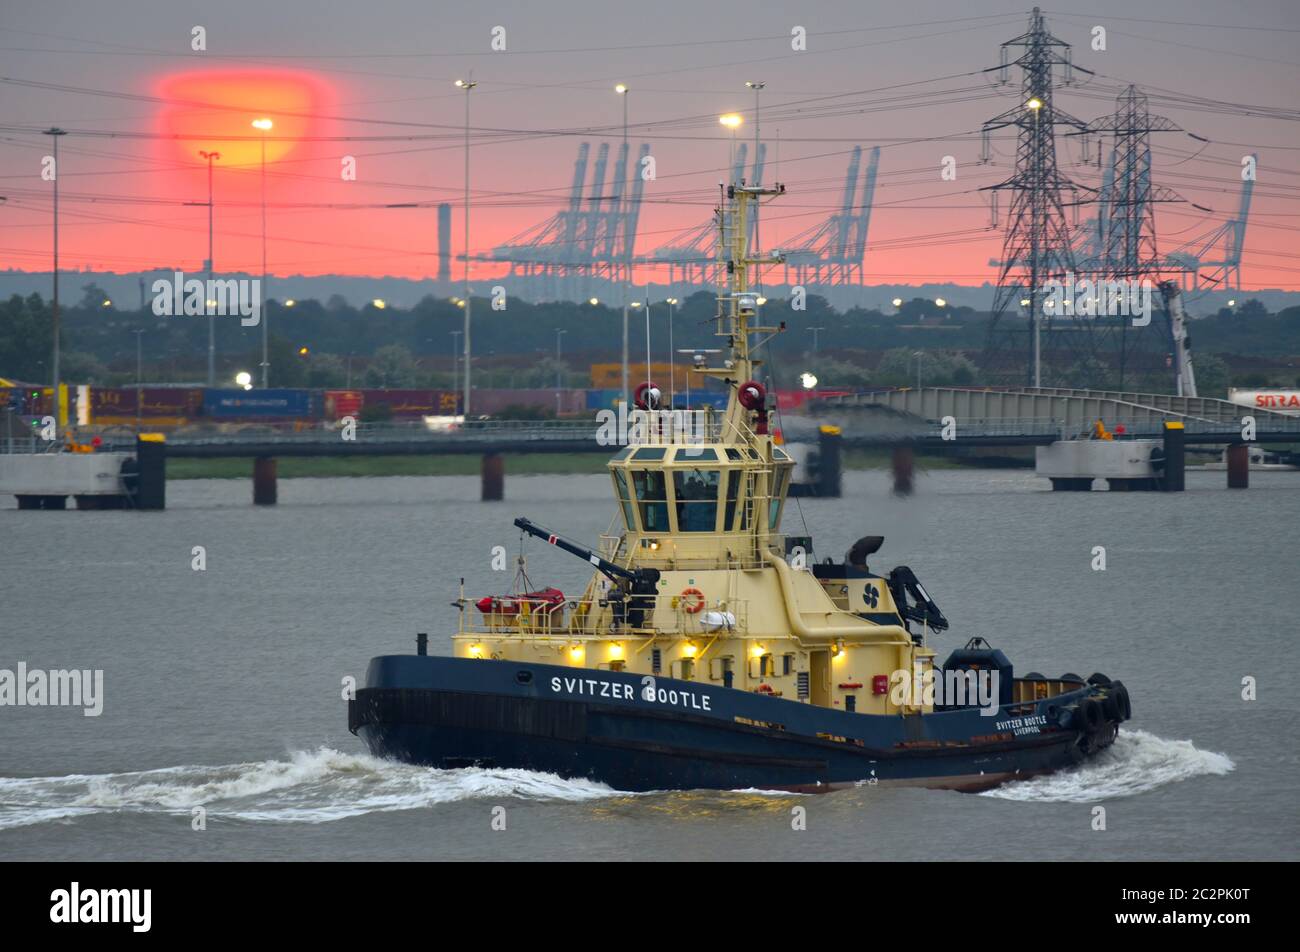 Tug Svitzer Bootle on the Thames with the sun rising over London Gateway. Stock Photo